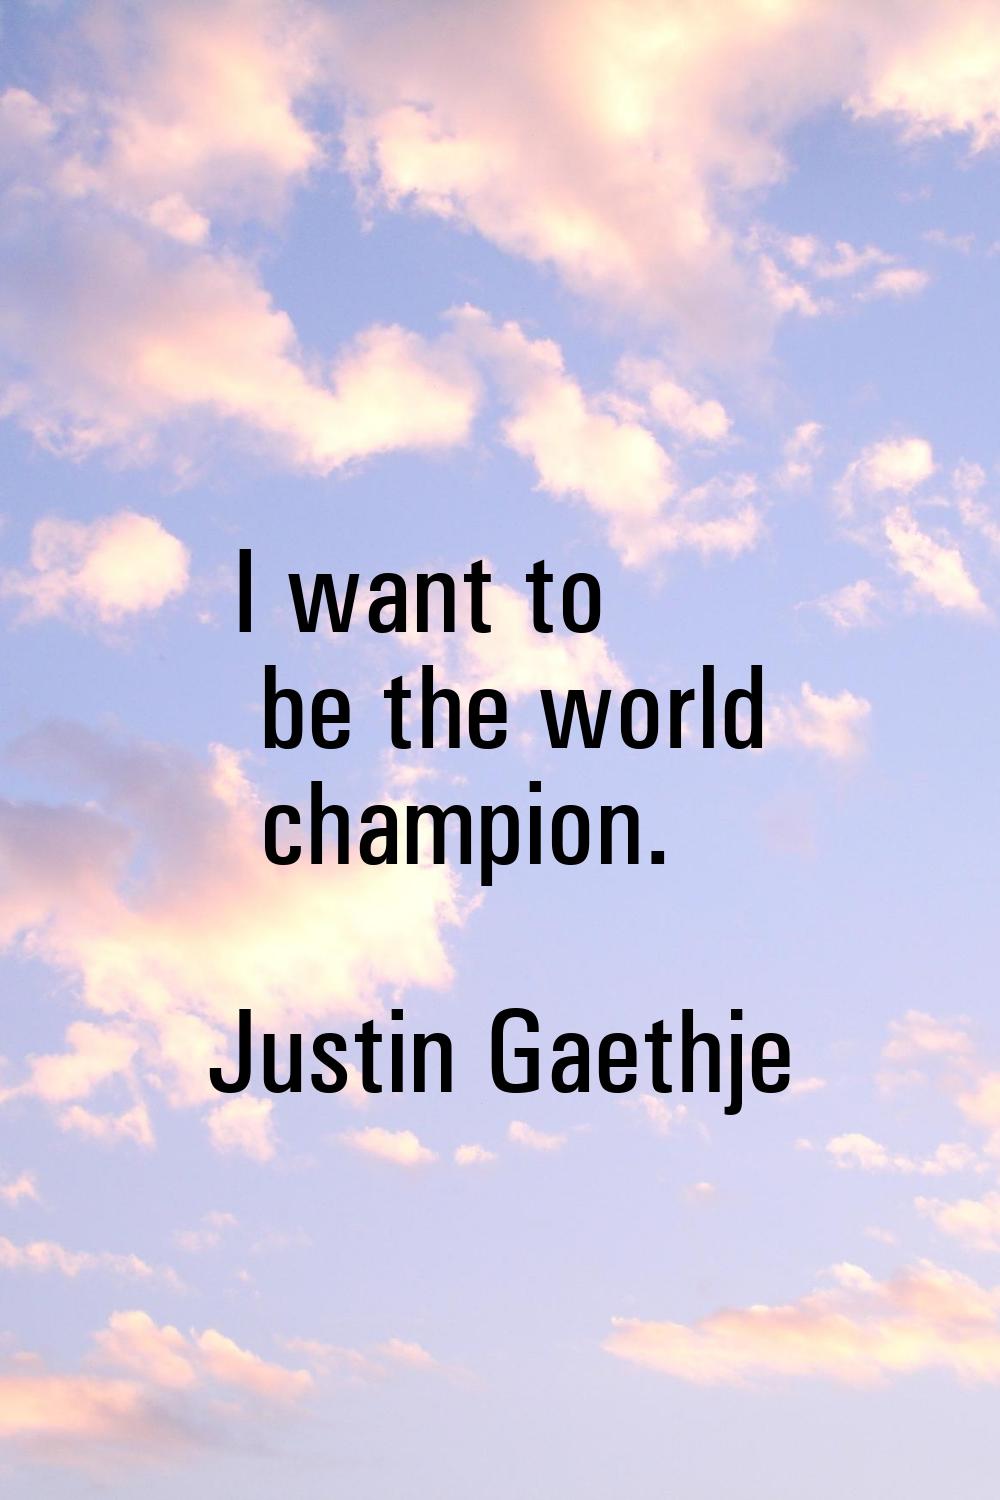 I want to be the world champion.